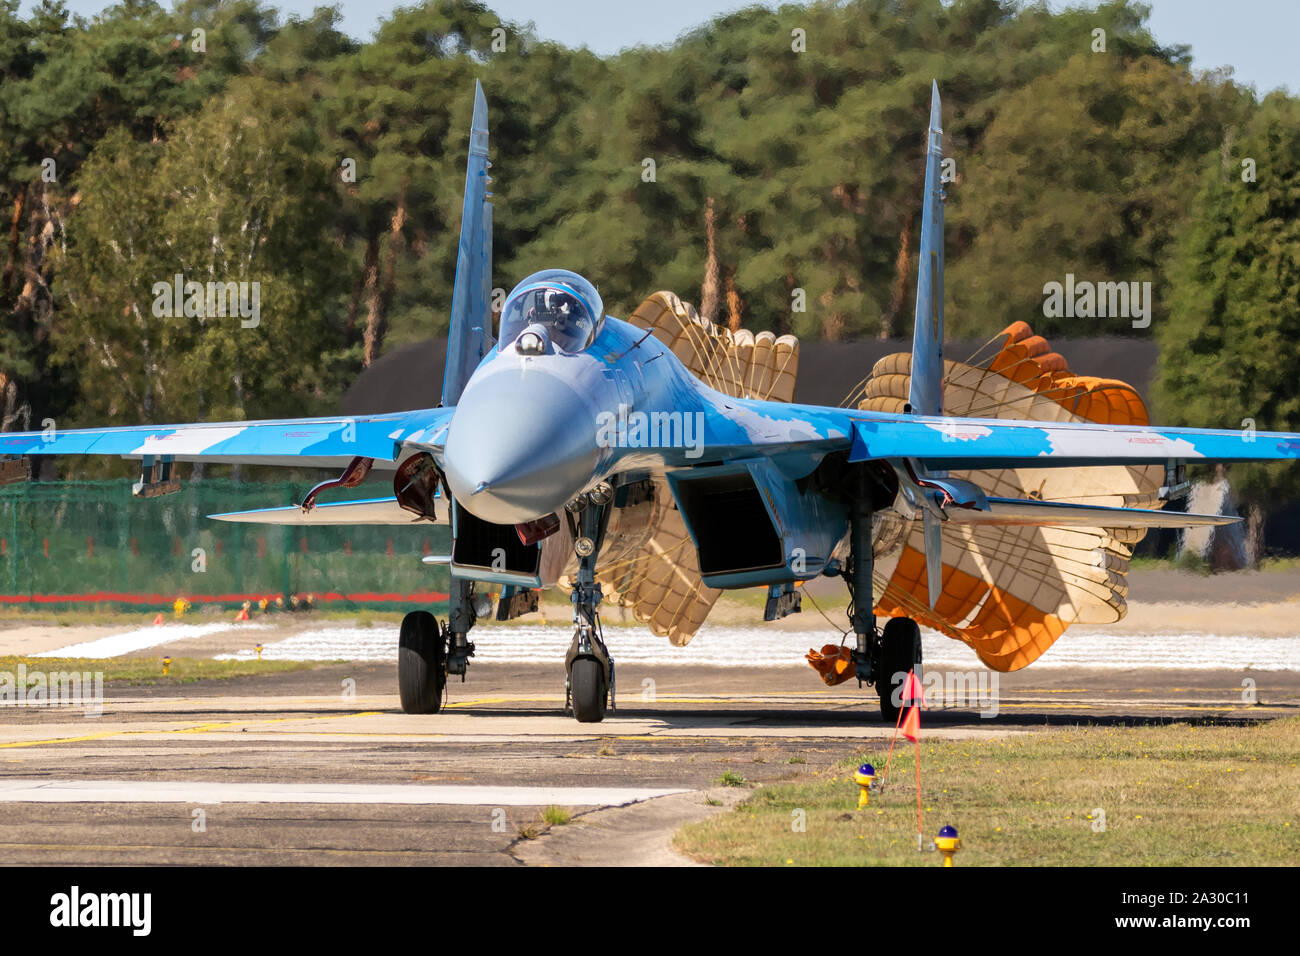 KLEINE BROGEL, BELGIUM - SEP 14, 2019: Ukrainian Air Force Sukhoi Su-27 Flanker fighter jet aircraft taxiing with parachute after landing on Kleine-Br Stock Photo